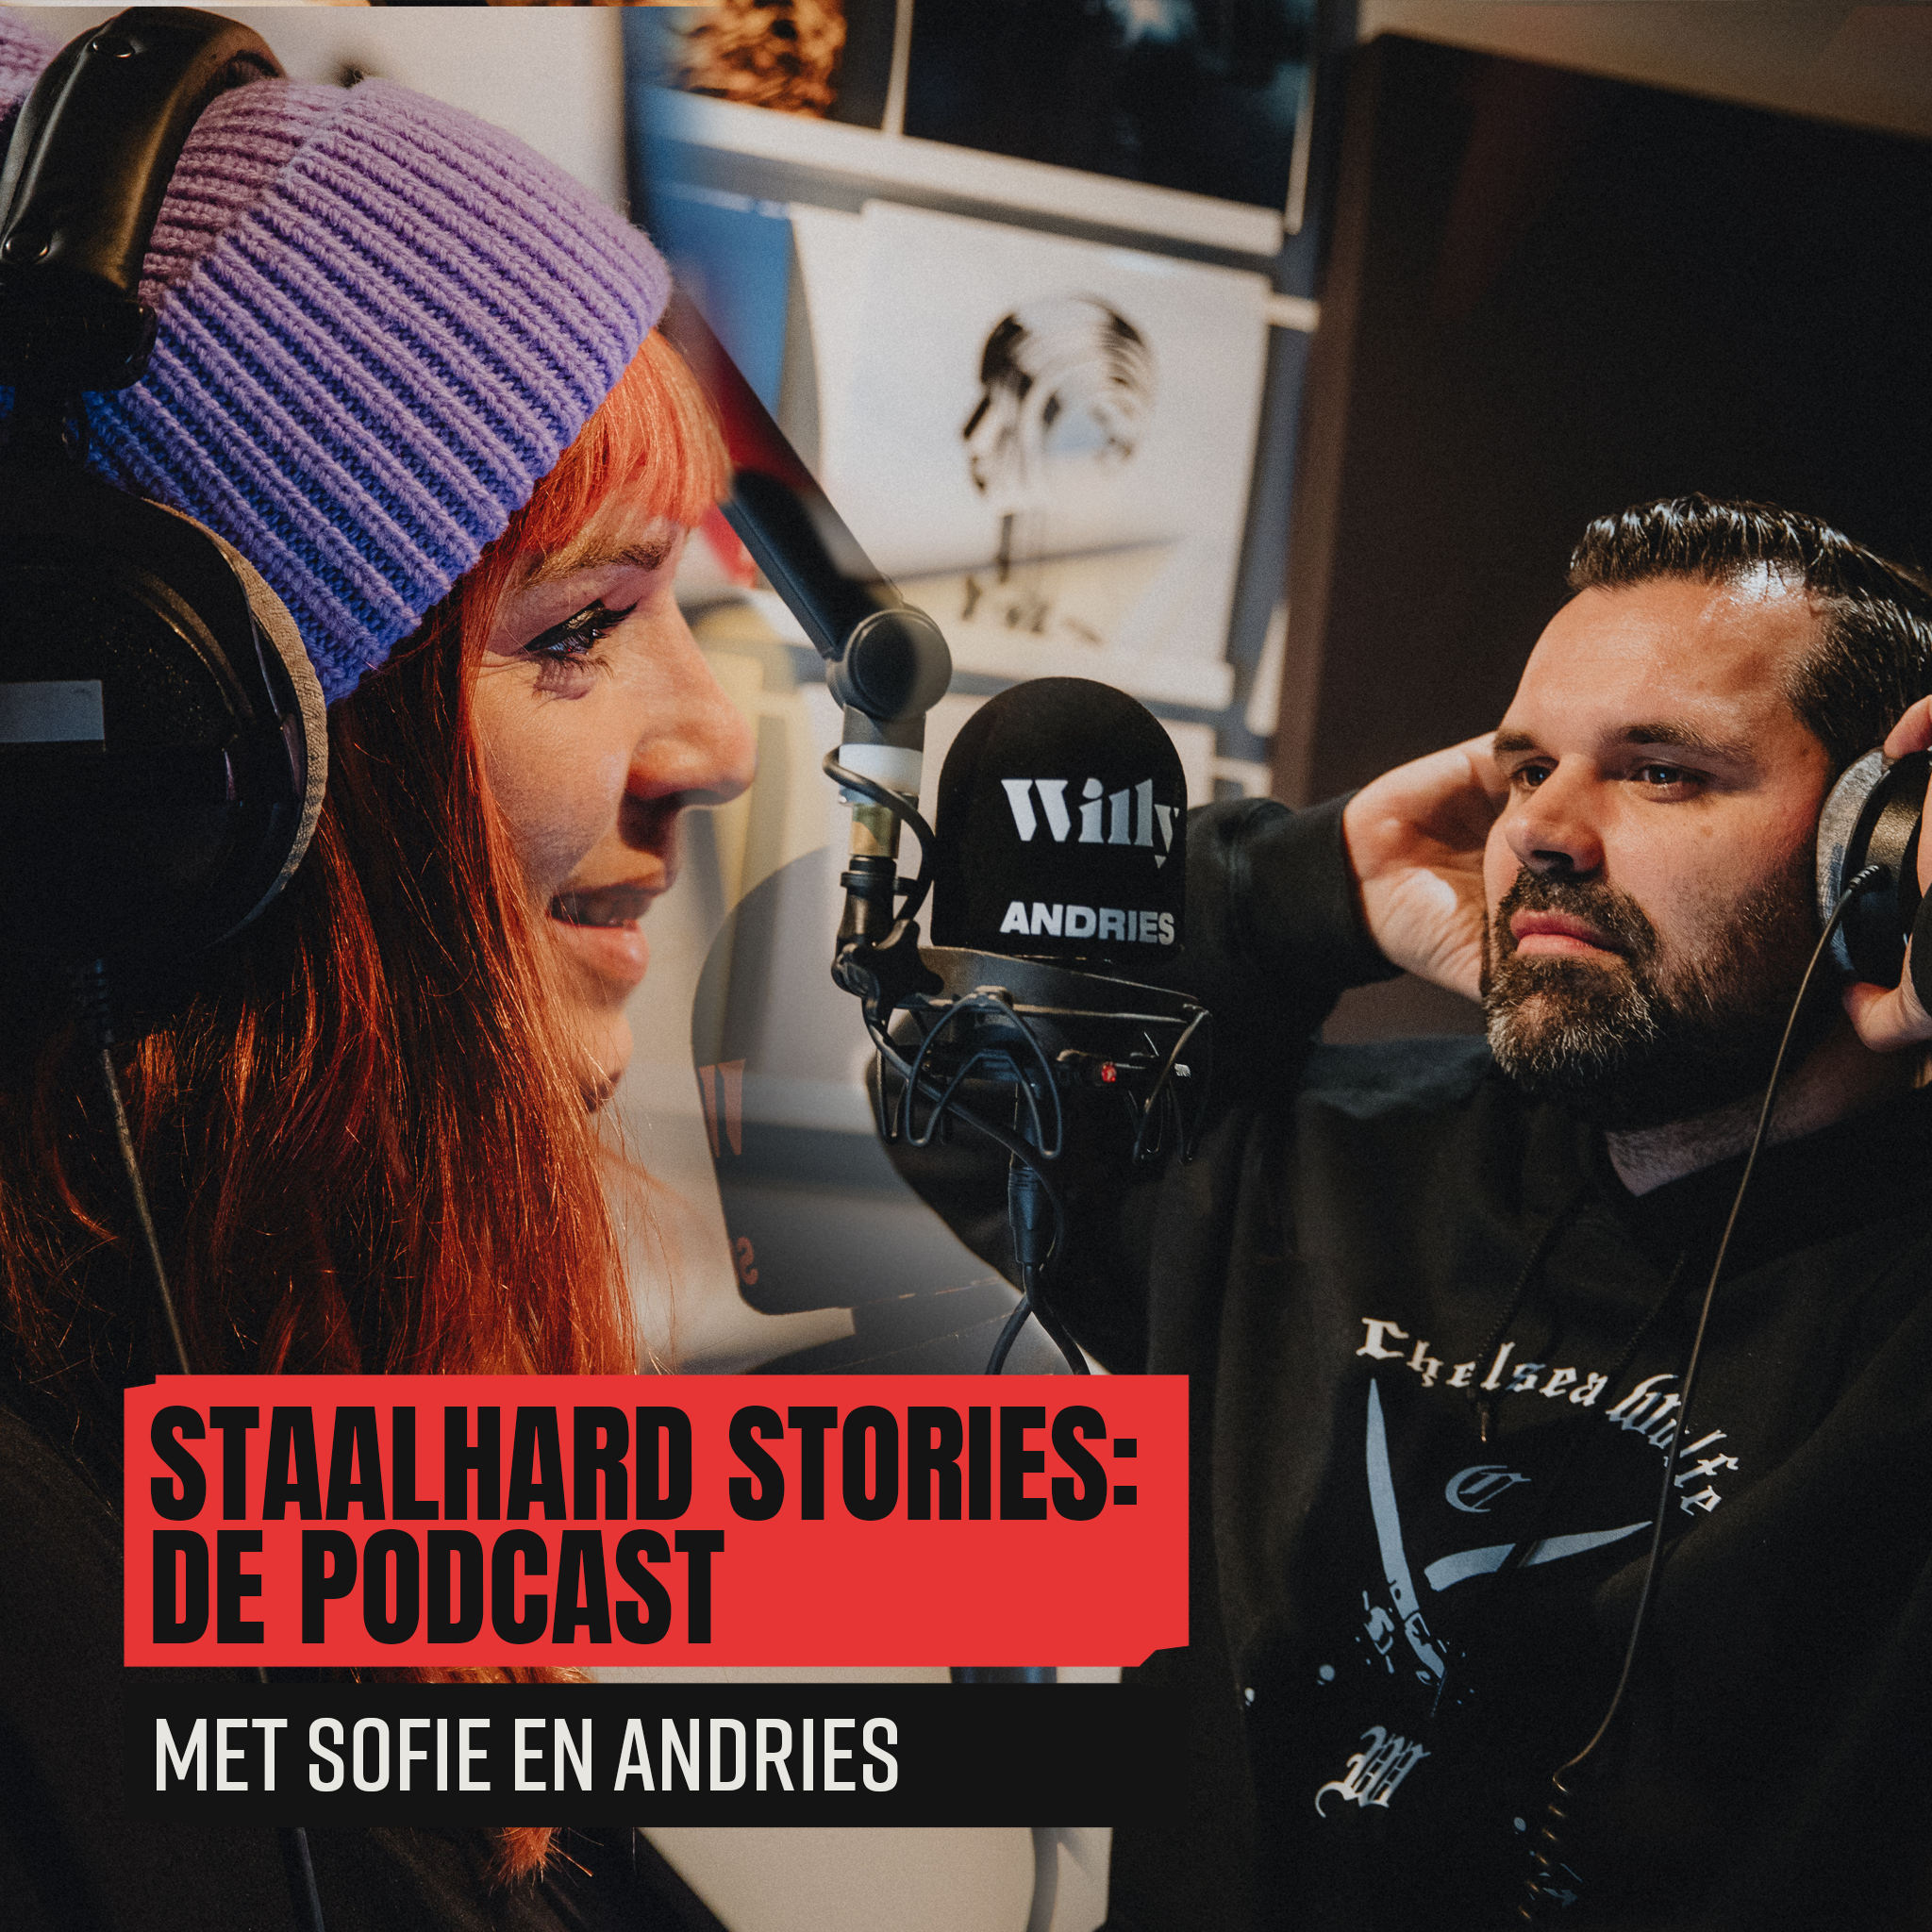 Willy Talks: Staalhard Stories 2 (2022)